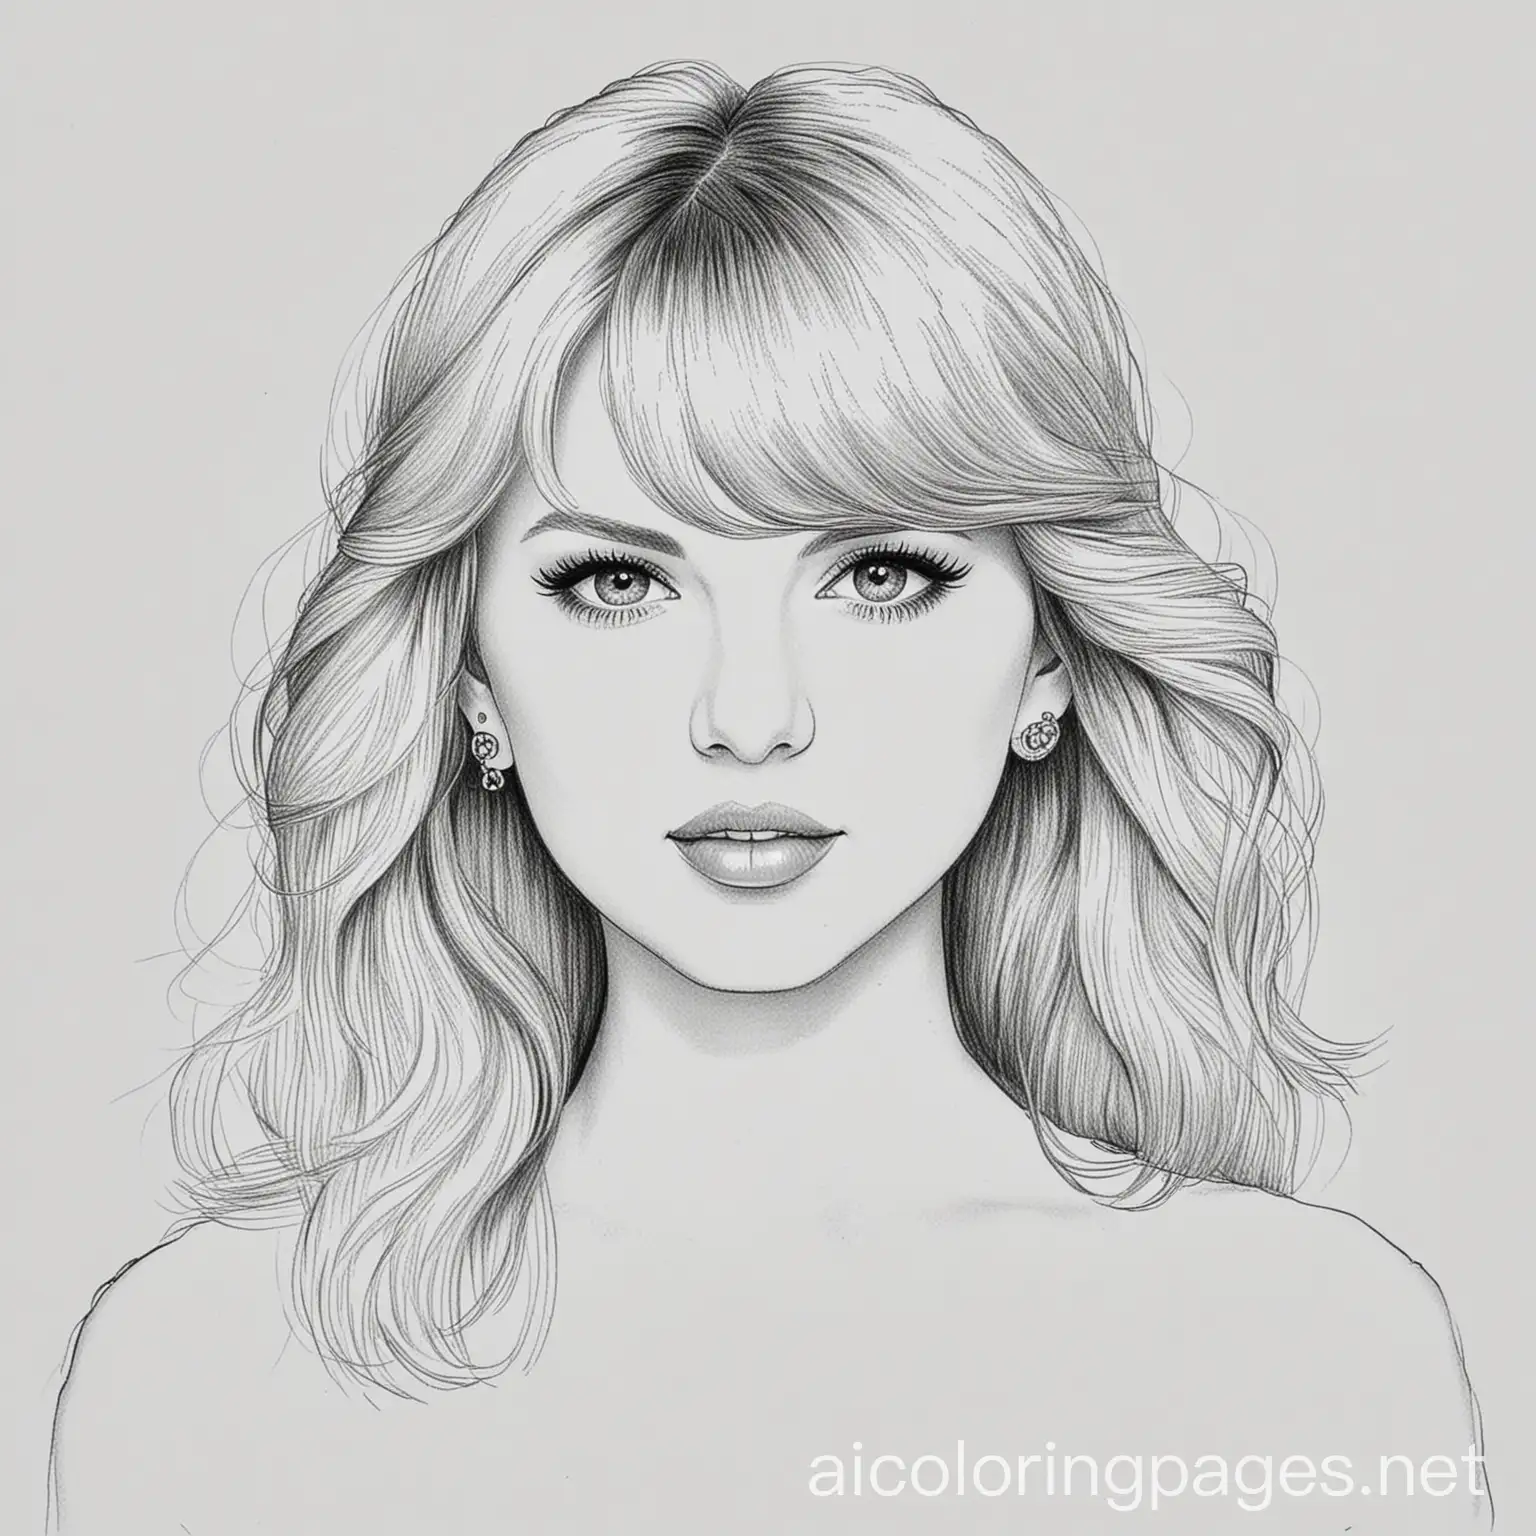 taylor swift coloring page for kids, Coloring Page, black and white, line art, white background, Simplicity, Ample White Space. The background of the coloring page is plain white to make it easy for young children to color within the lines. The outlines of all the subjects are easy to distinguish, making it simple for kids to color without too much difficulty